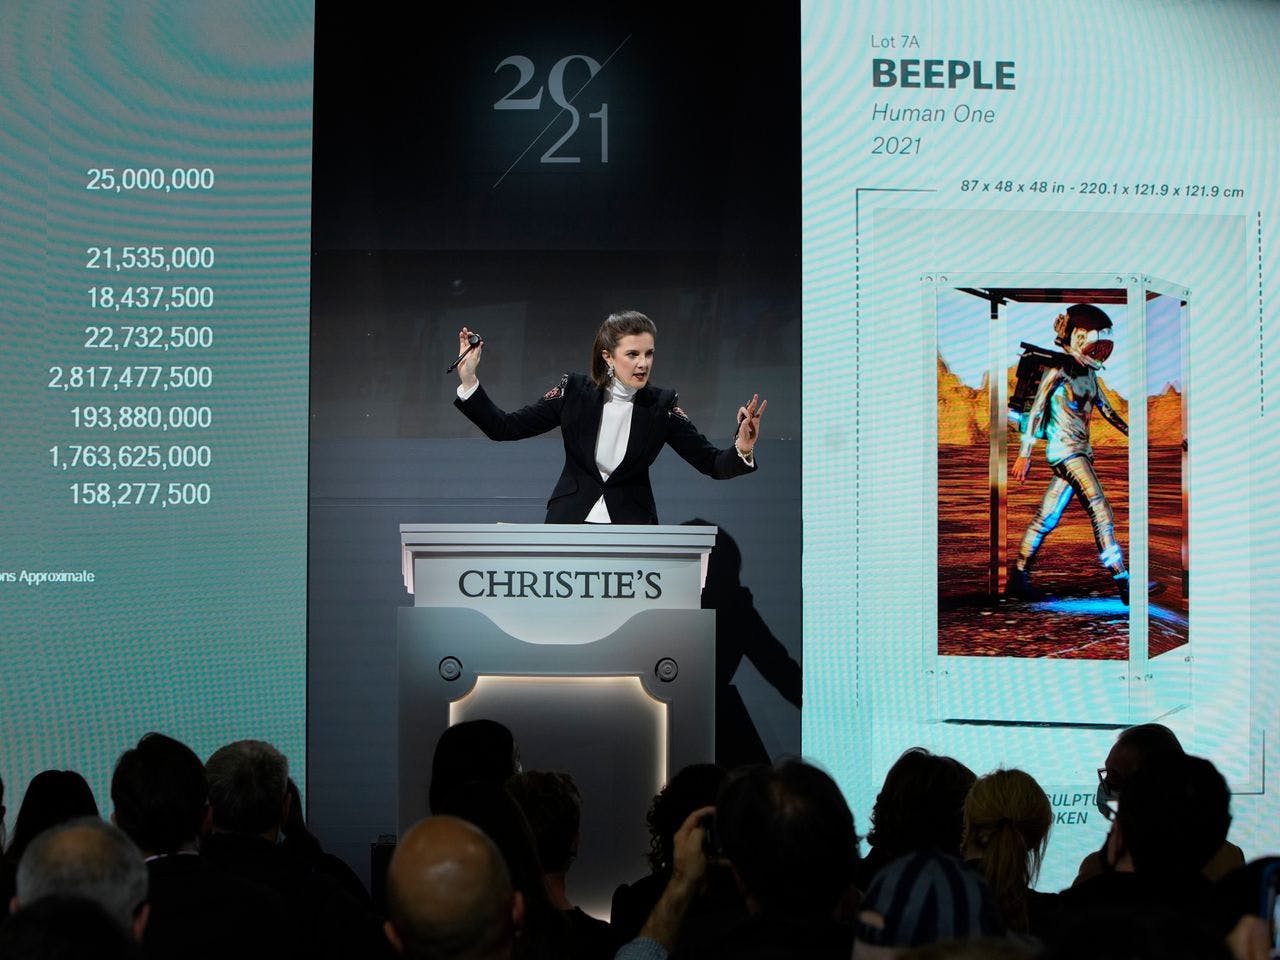 Beeple’s Human One, the second landmark NFT sale for Christie’s, and the artist. Image from: https://www.wsj.com/articles/how-christies-is-pitching-its-expansion-from-picassos-to-nfts-11637700438